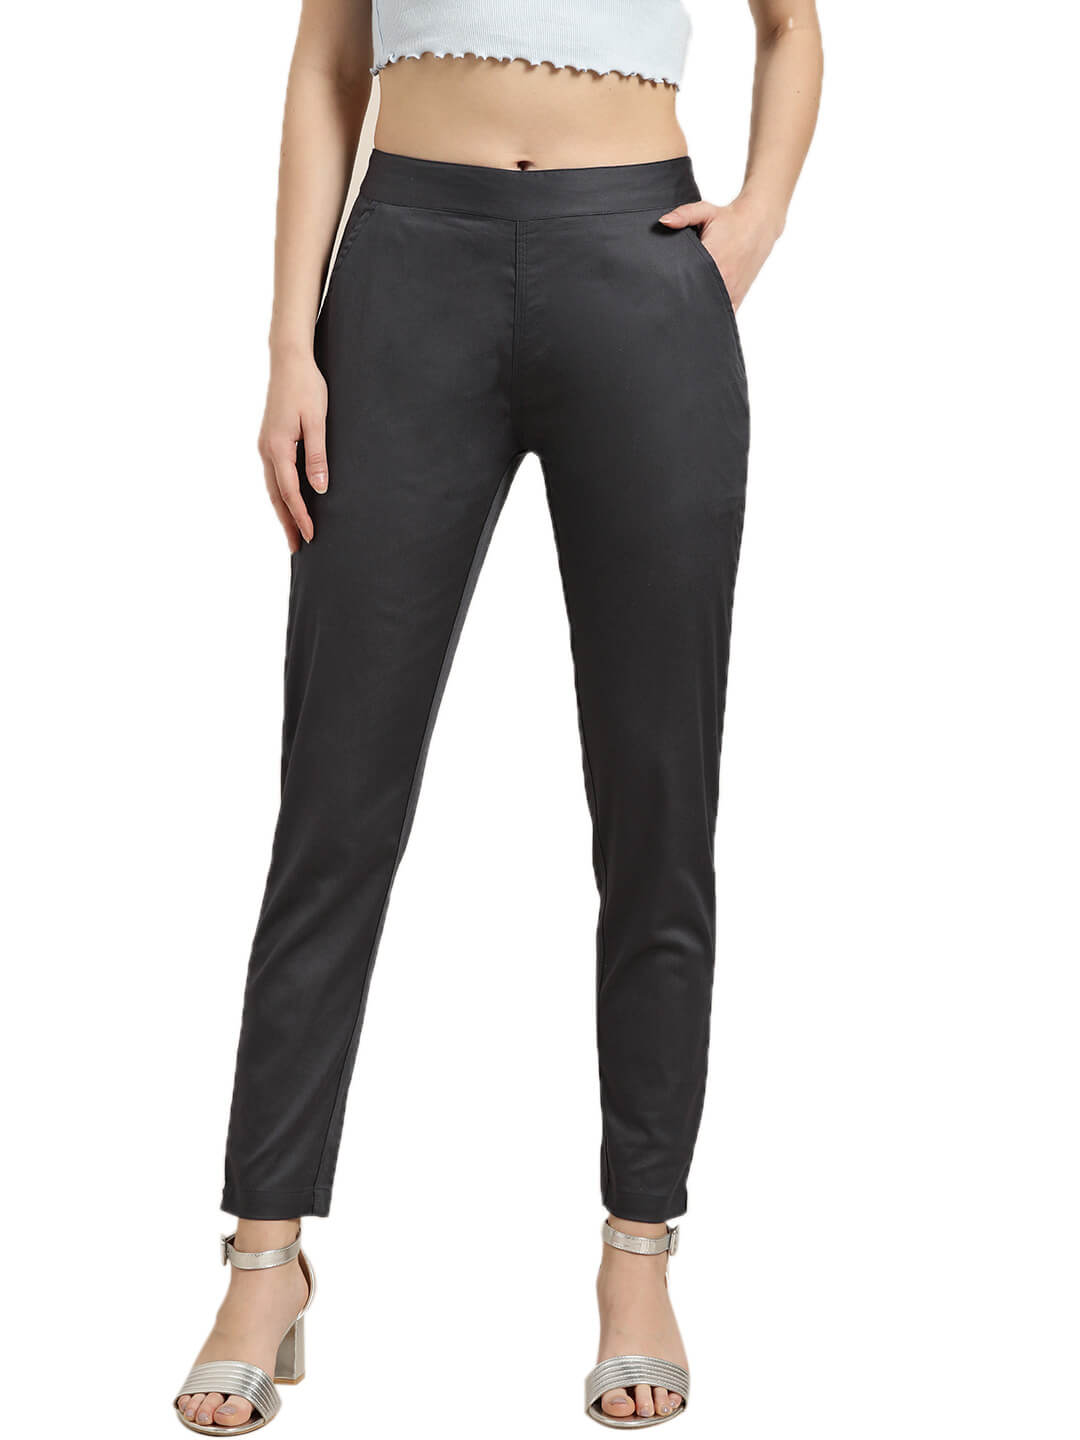 Charcoal Grey Solid Cotton Lycra Pleated Pants